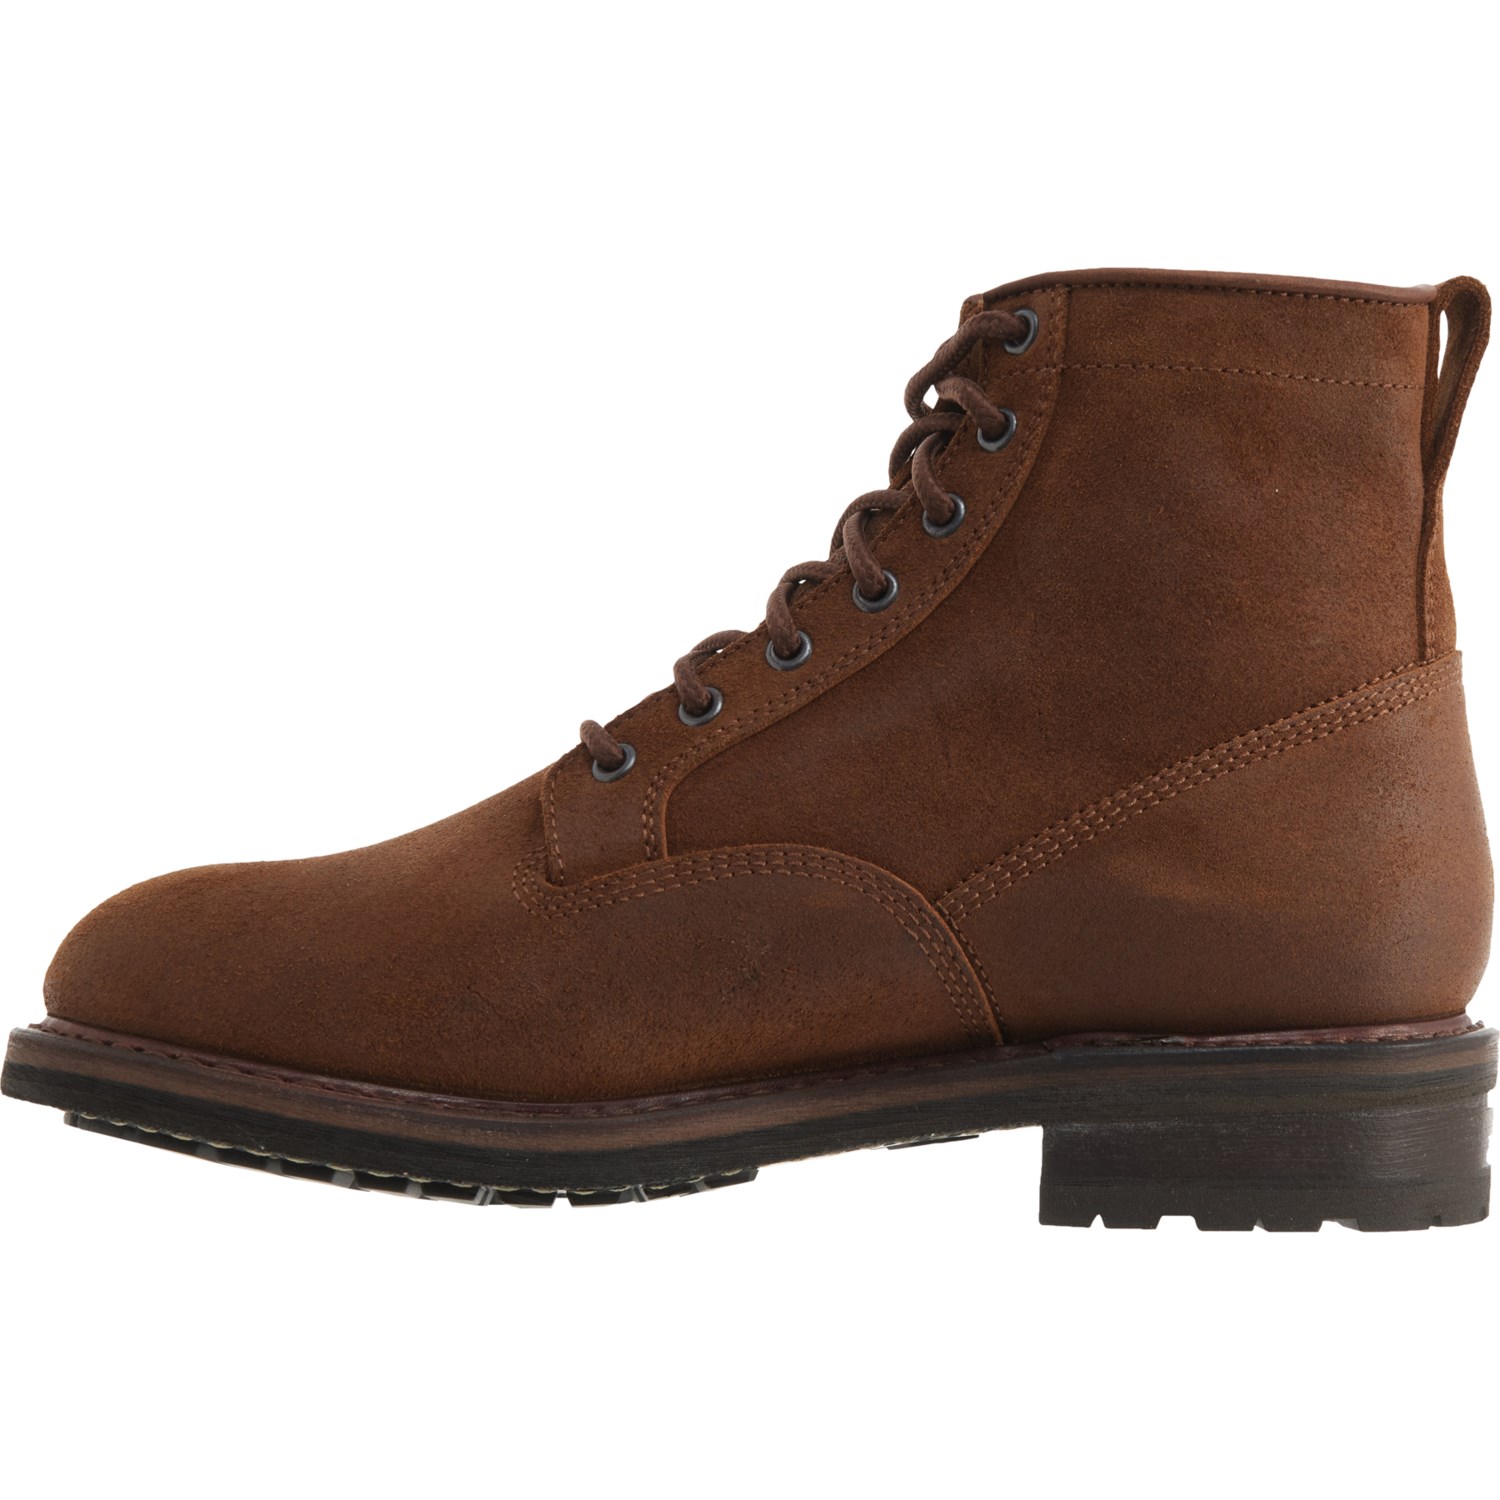 Filson Made in Portugal Service Boots (For Men) - Save 37%